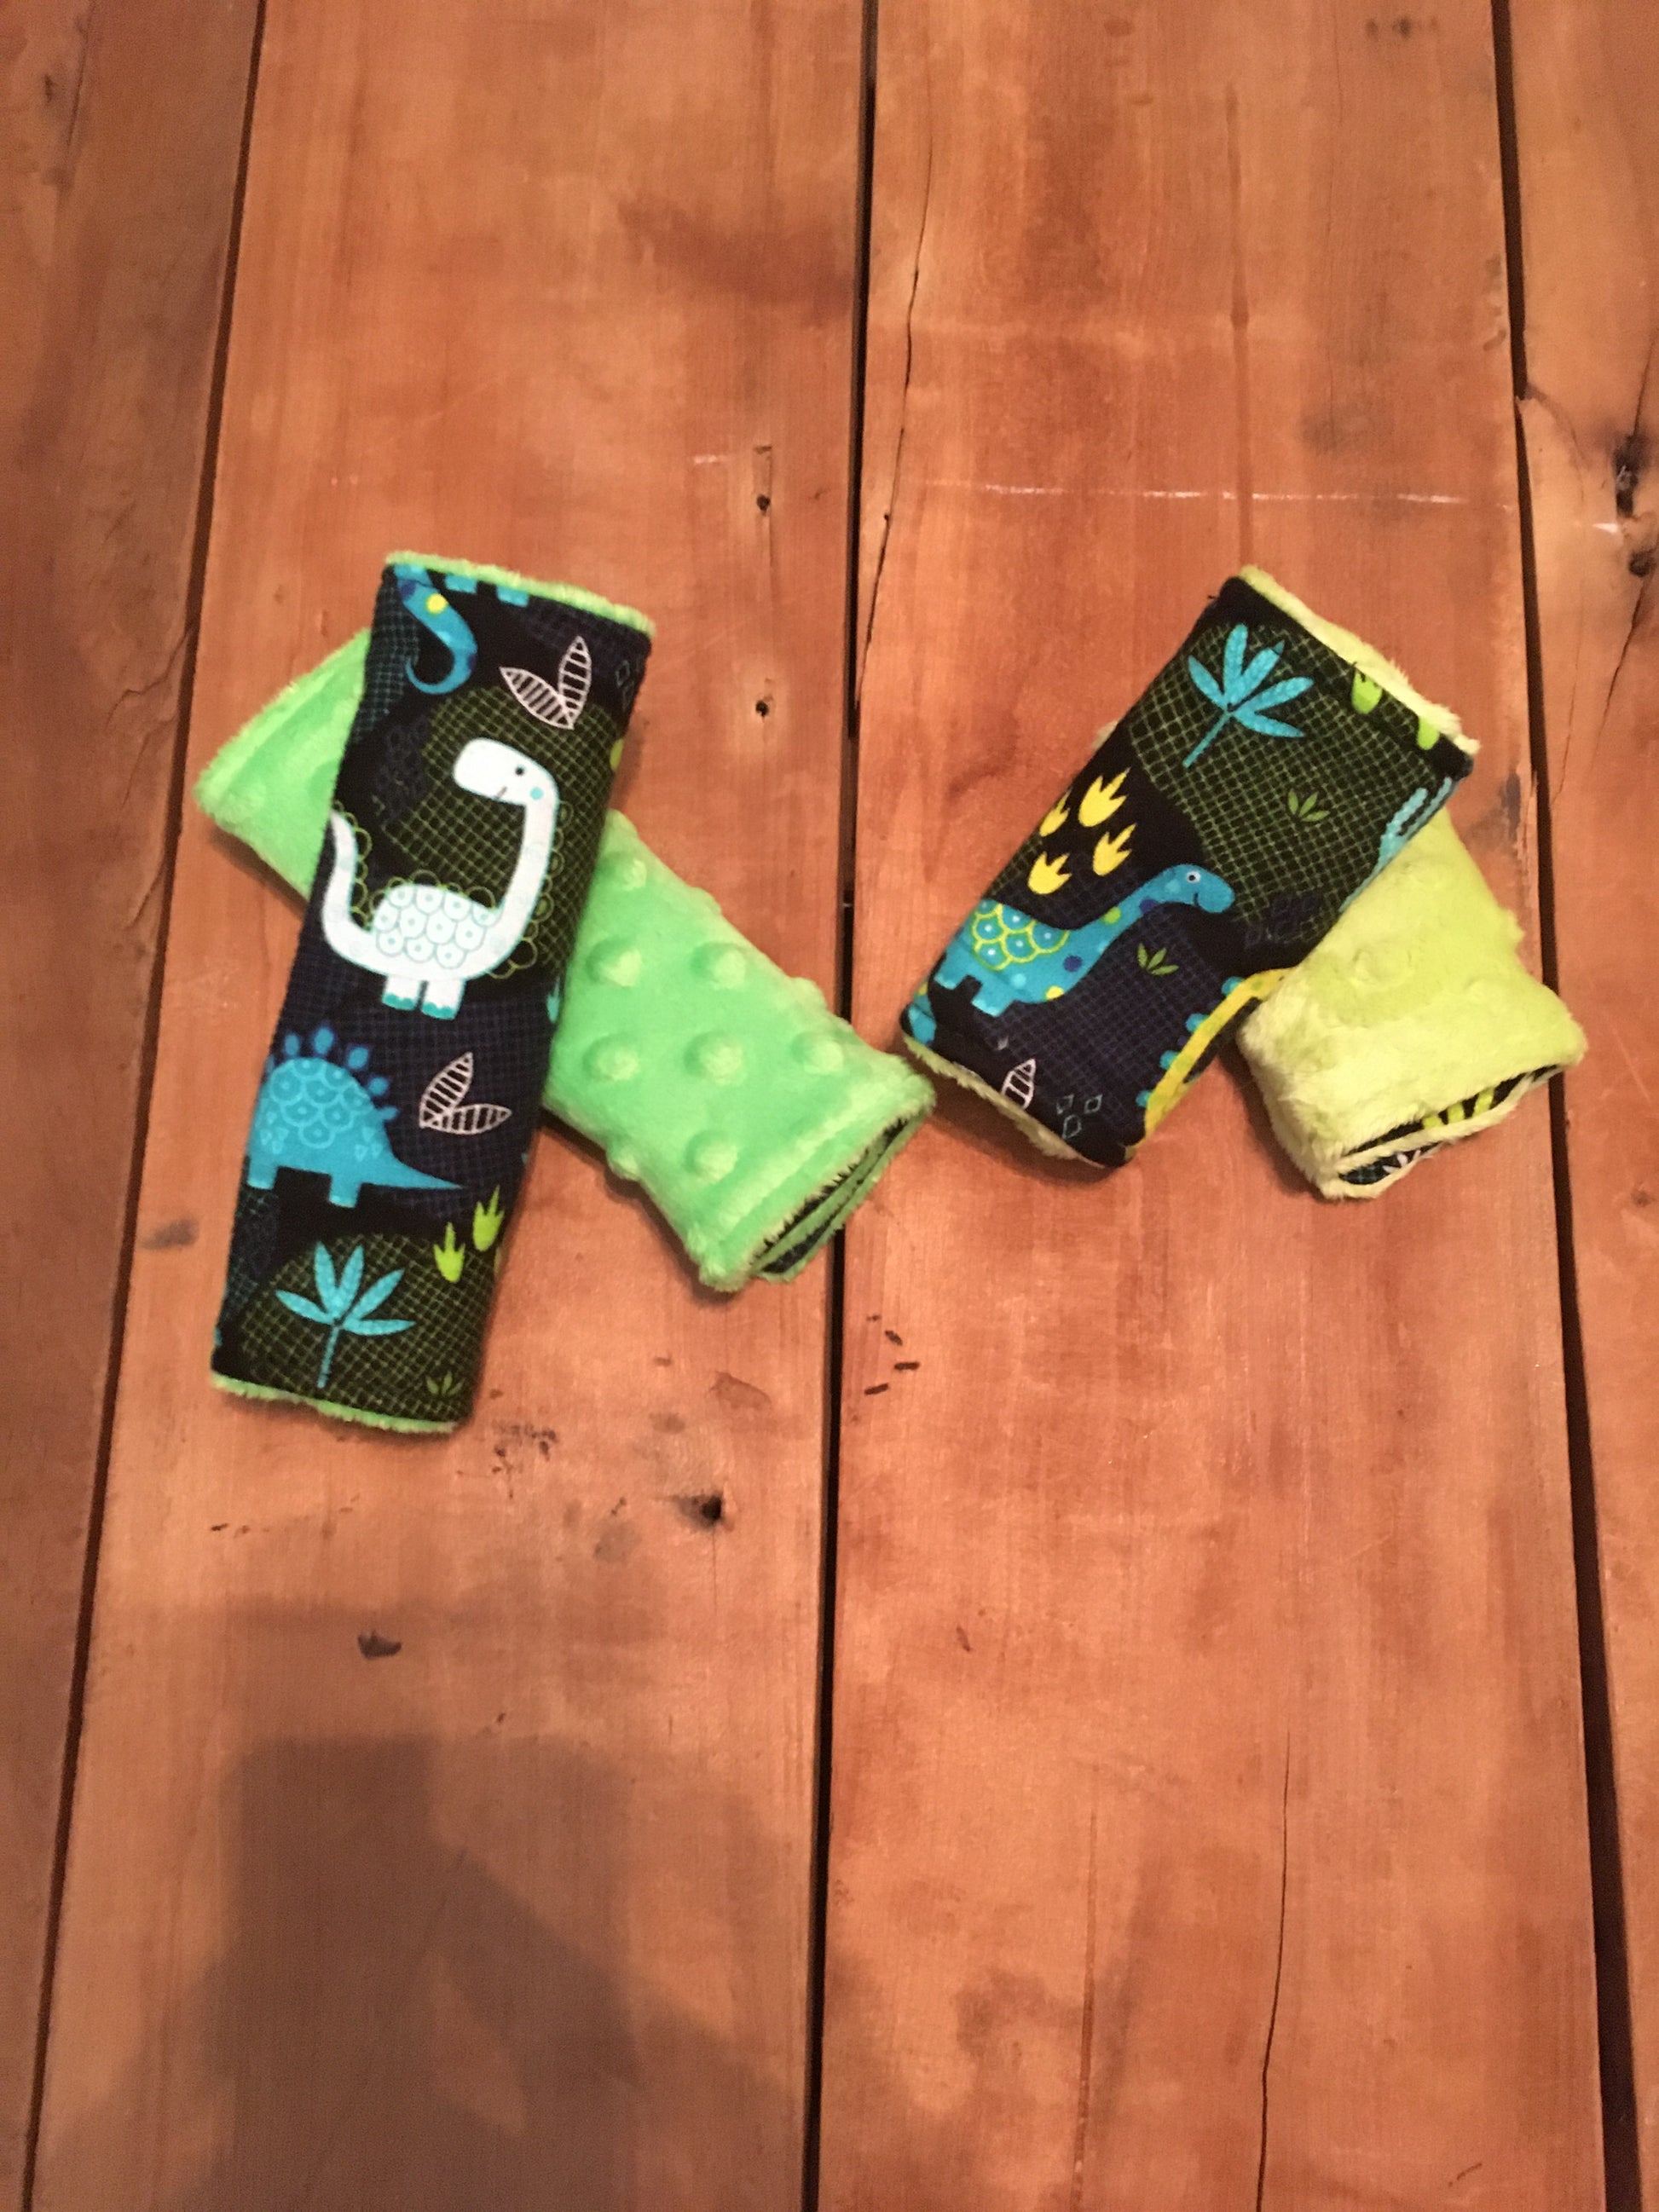 black dinosaur car seat strap covers, dinosaurs in yellow, white, blue/aqua, lime green shown in 6" dark lime green & 4" lime green